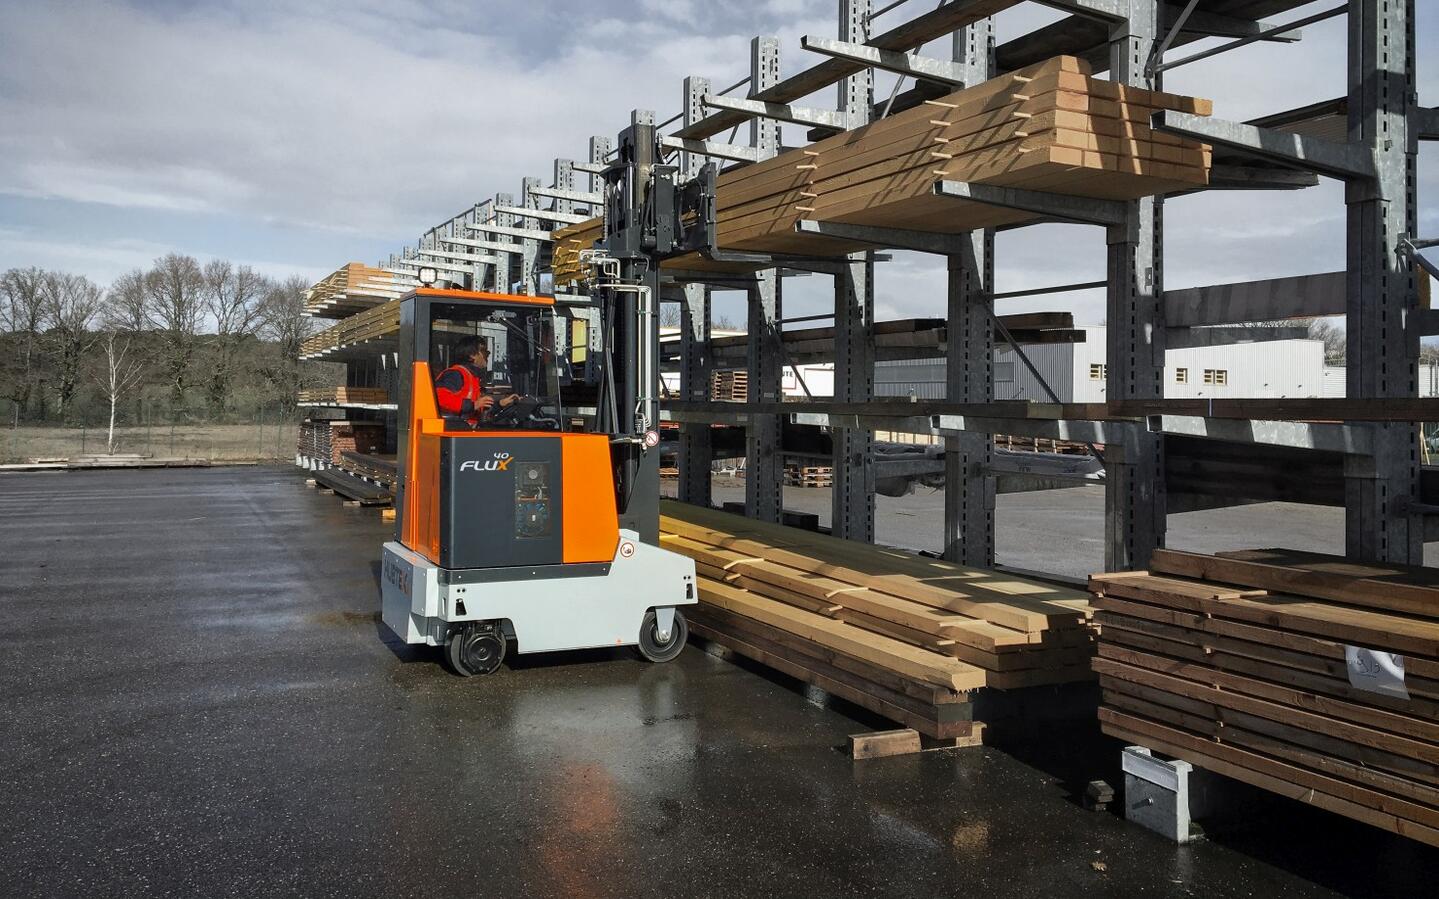 The FluX counterbalanced forklift in use at the outdoor storage facility 